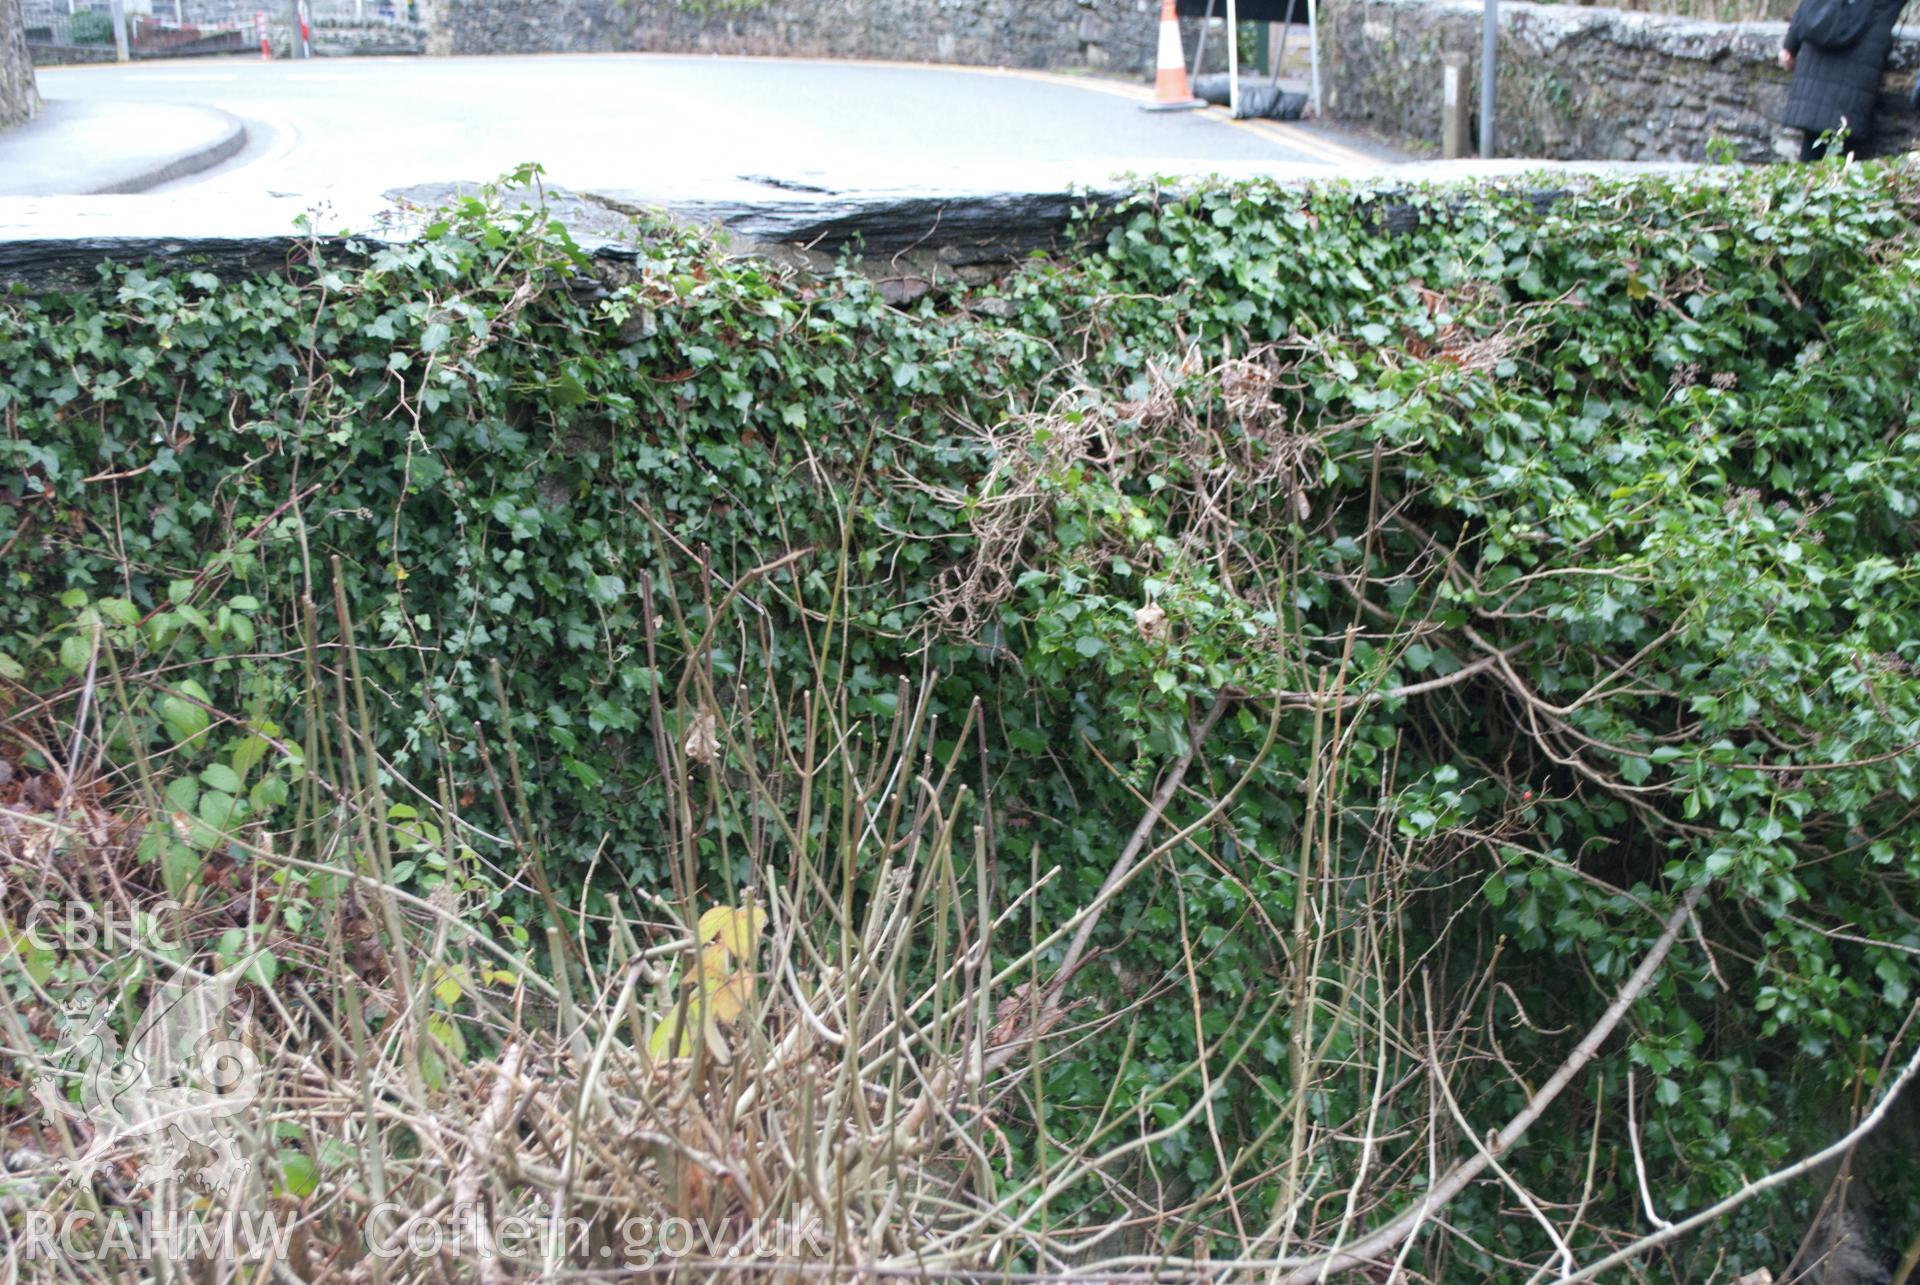 View of northwest facing side of parapet where coping stone is damaged (limited visibility). Digital photograph taken for Archaeological Watching Brief at Pont y Pair, Betws y Coed, 2019. Gwynedd Archaeological Trust Project ref G2587.